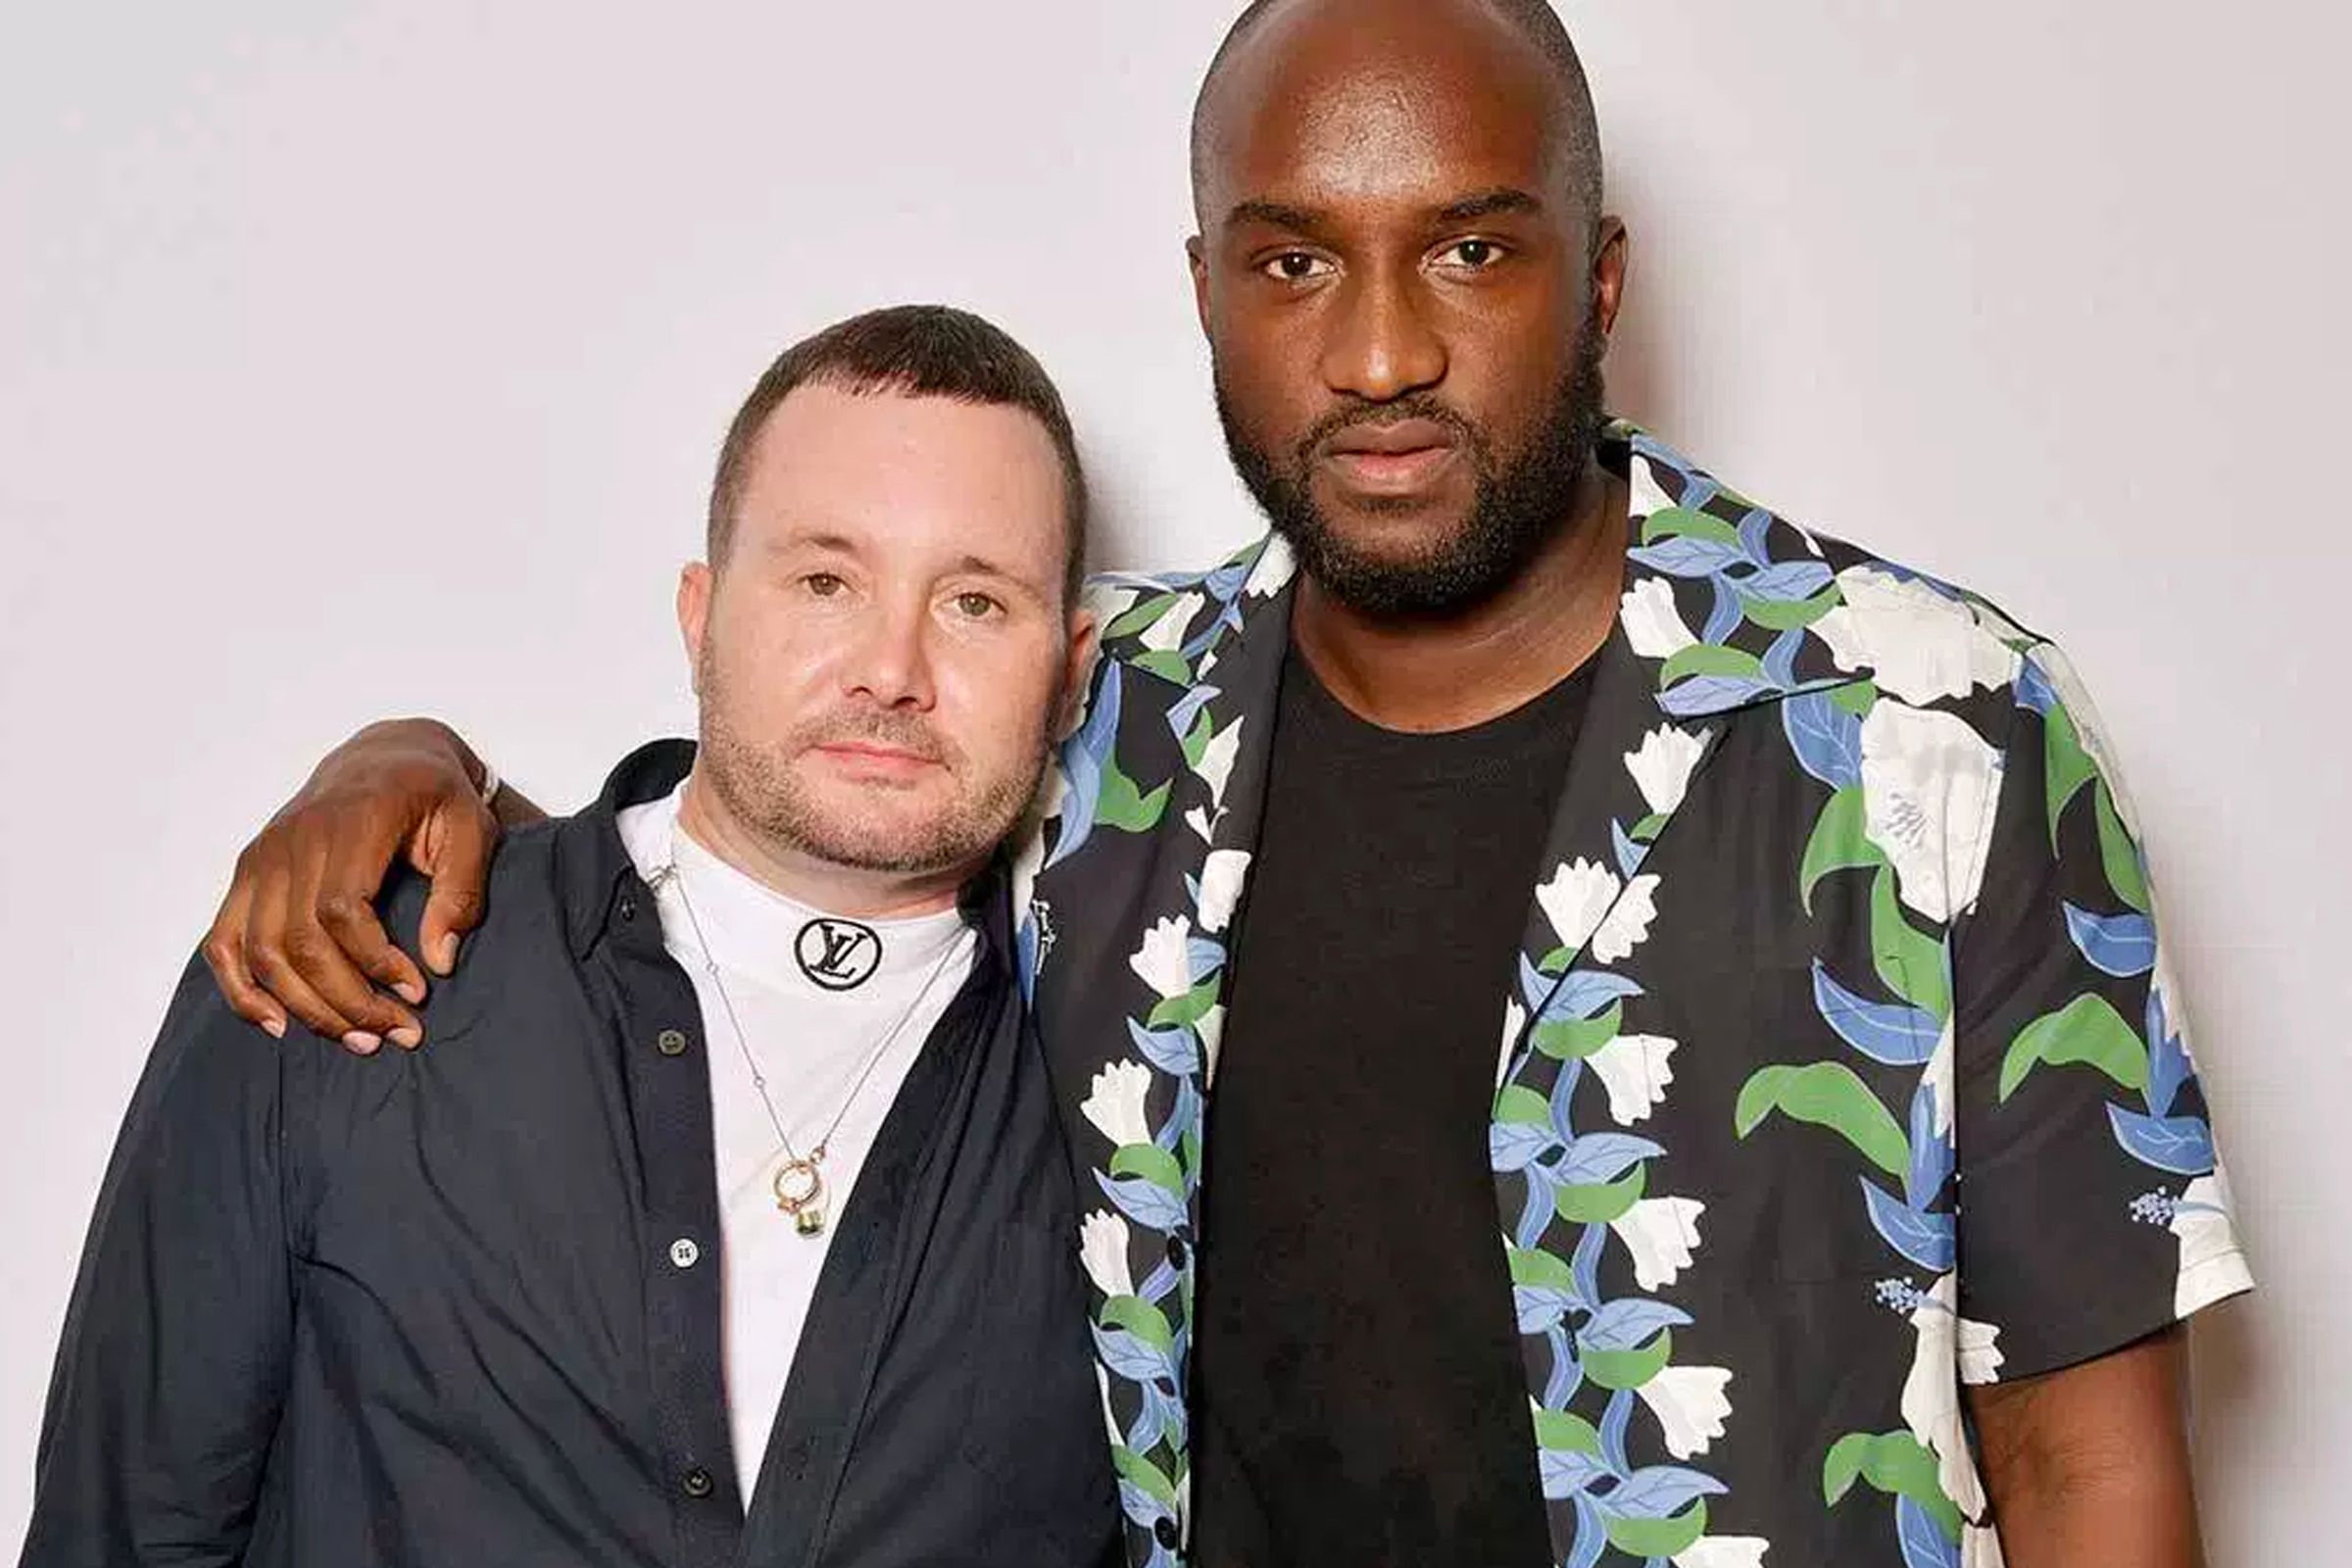 Are the Virgil Abloh Designs Losing Their Magic Lately?